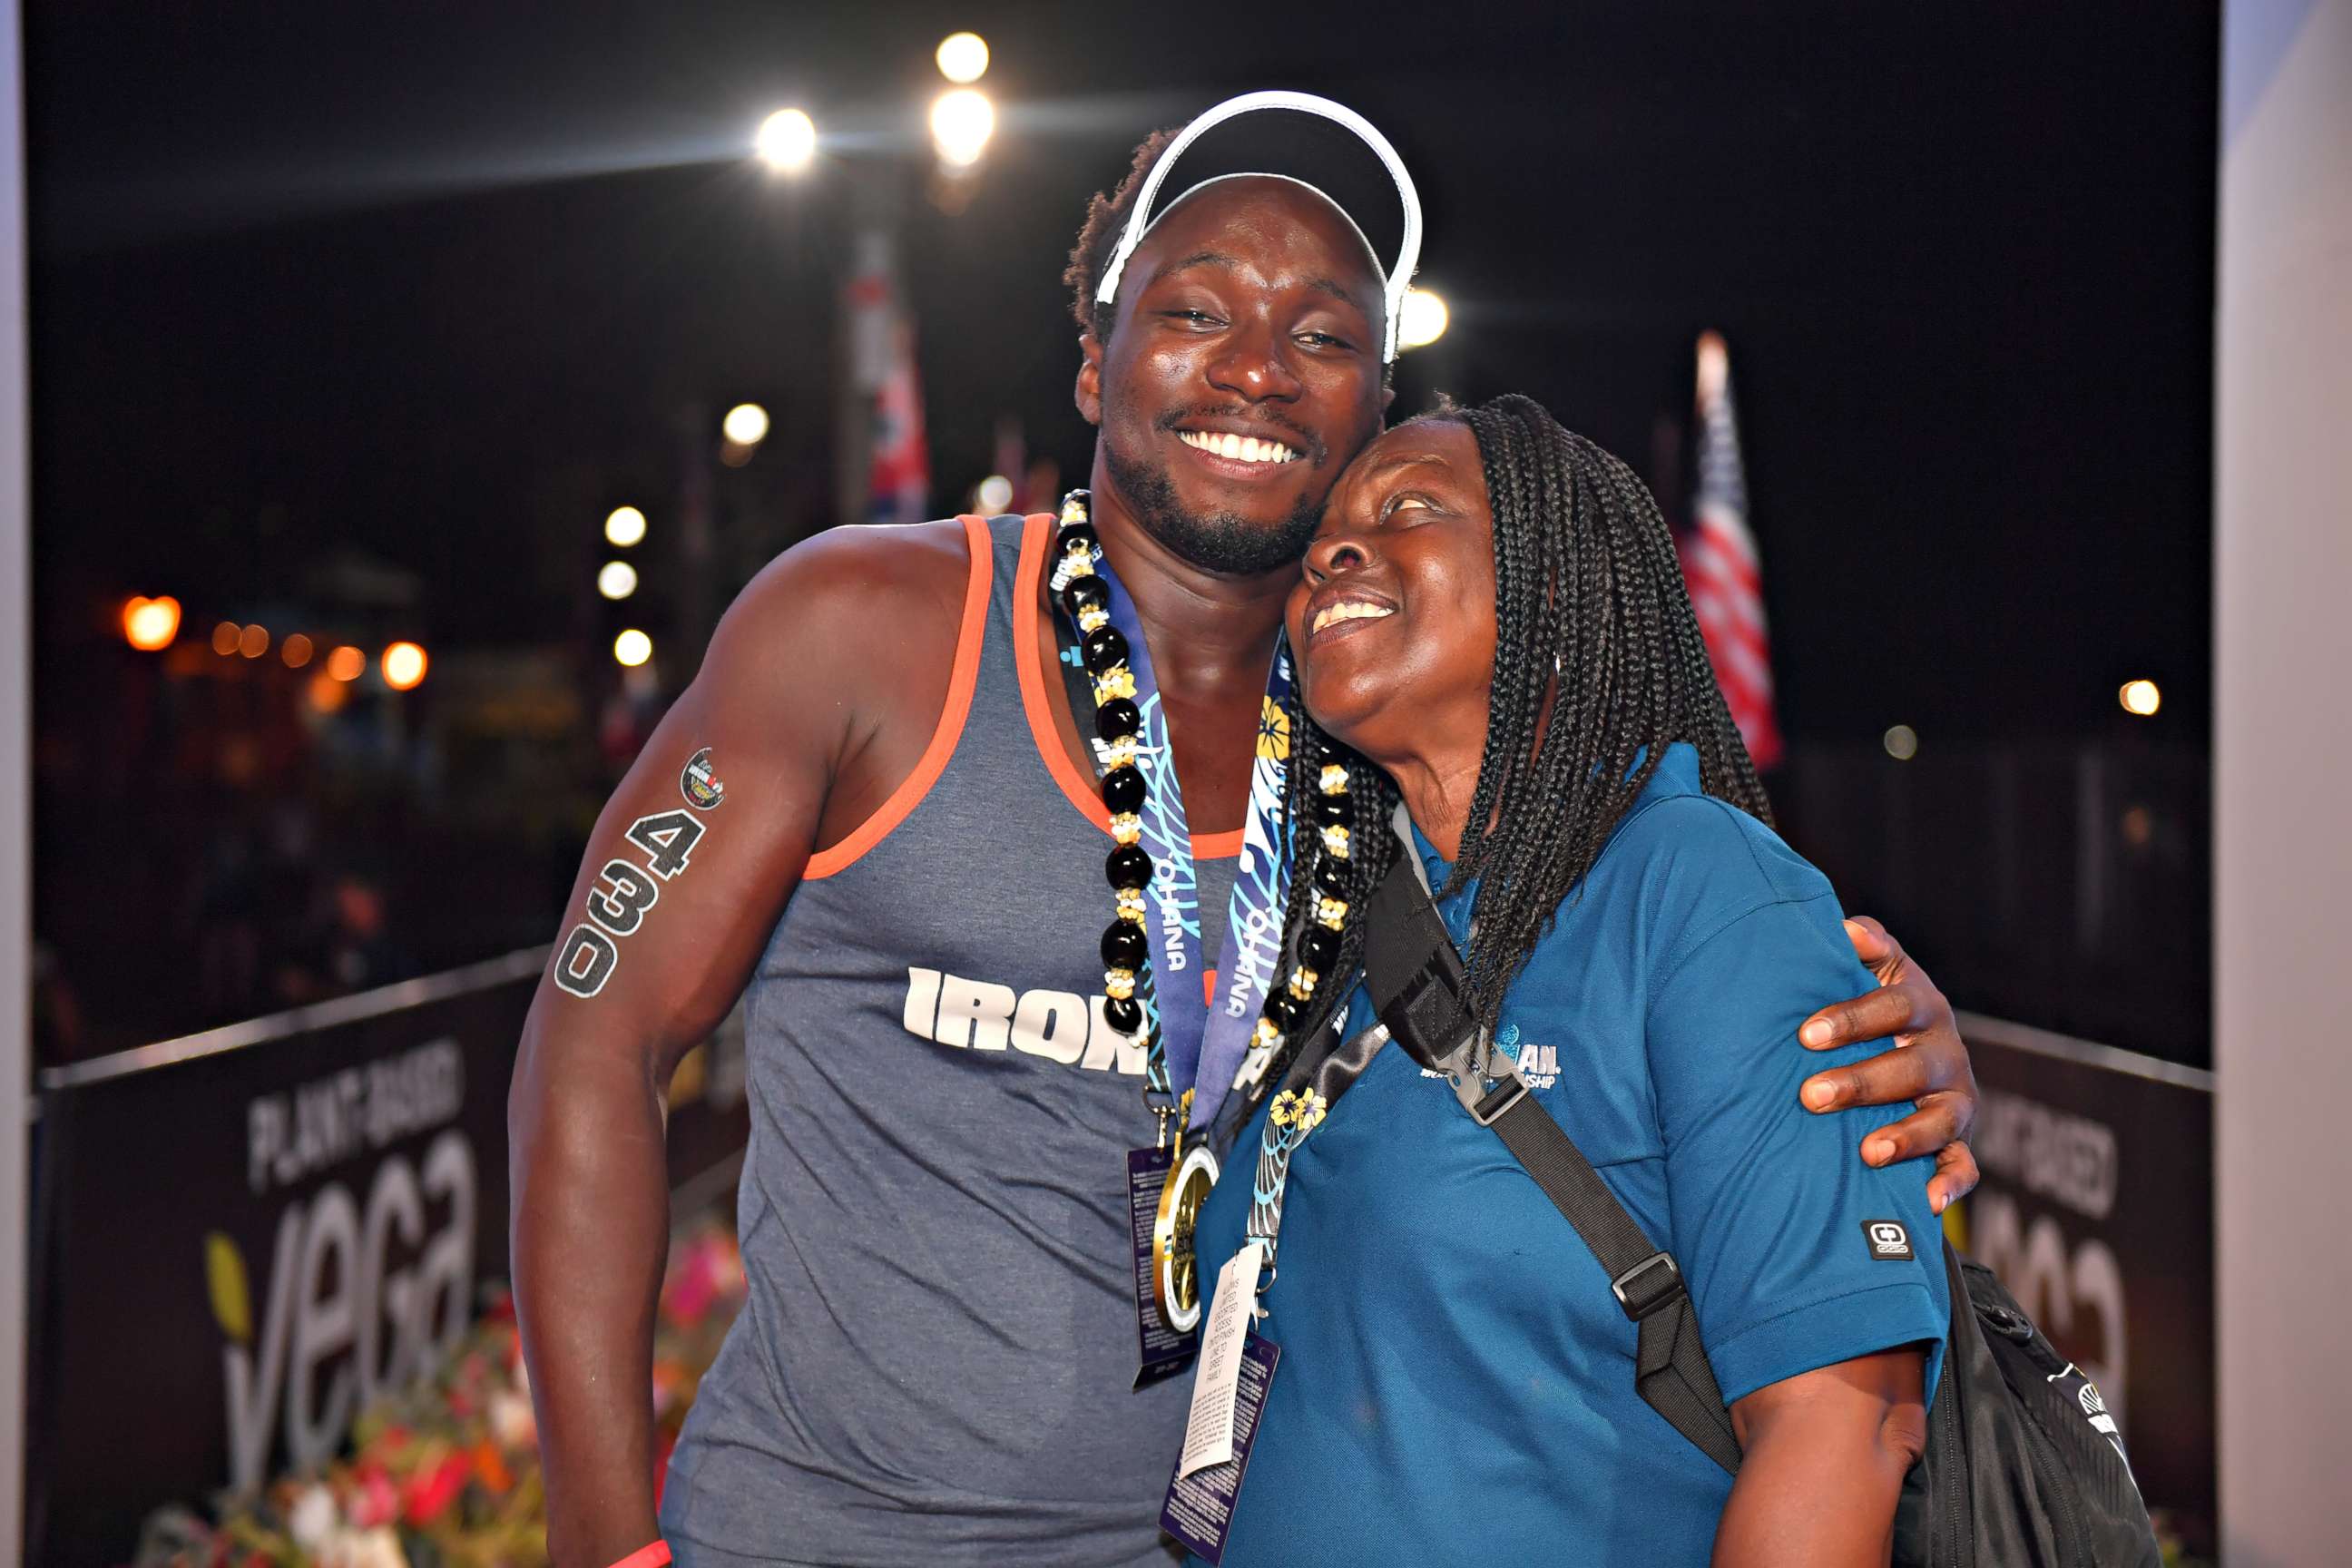 PHOTO:Roderick Sewell with his mother, Marian Jackson, after completing the 2019 Ironman World Championship on Oct. 12, 2019, in Kailua Kona, Hawaii.